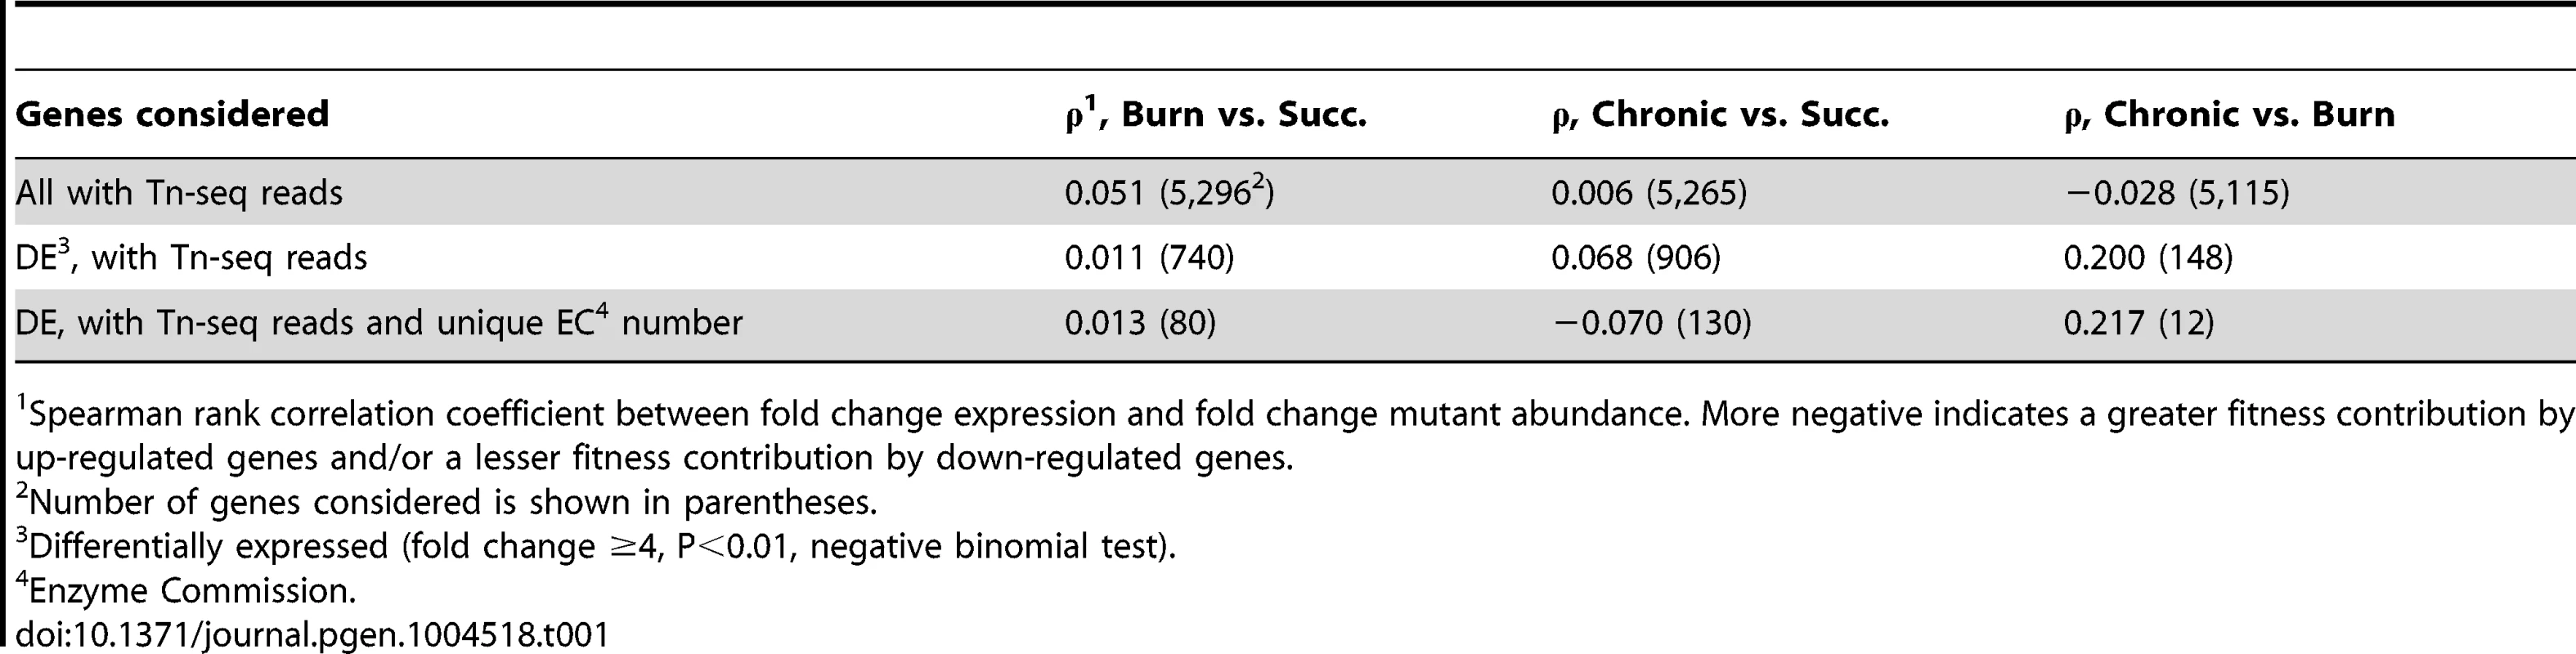 Differential expression and mutant fitness are poorly correlated.